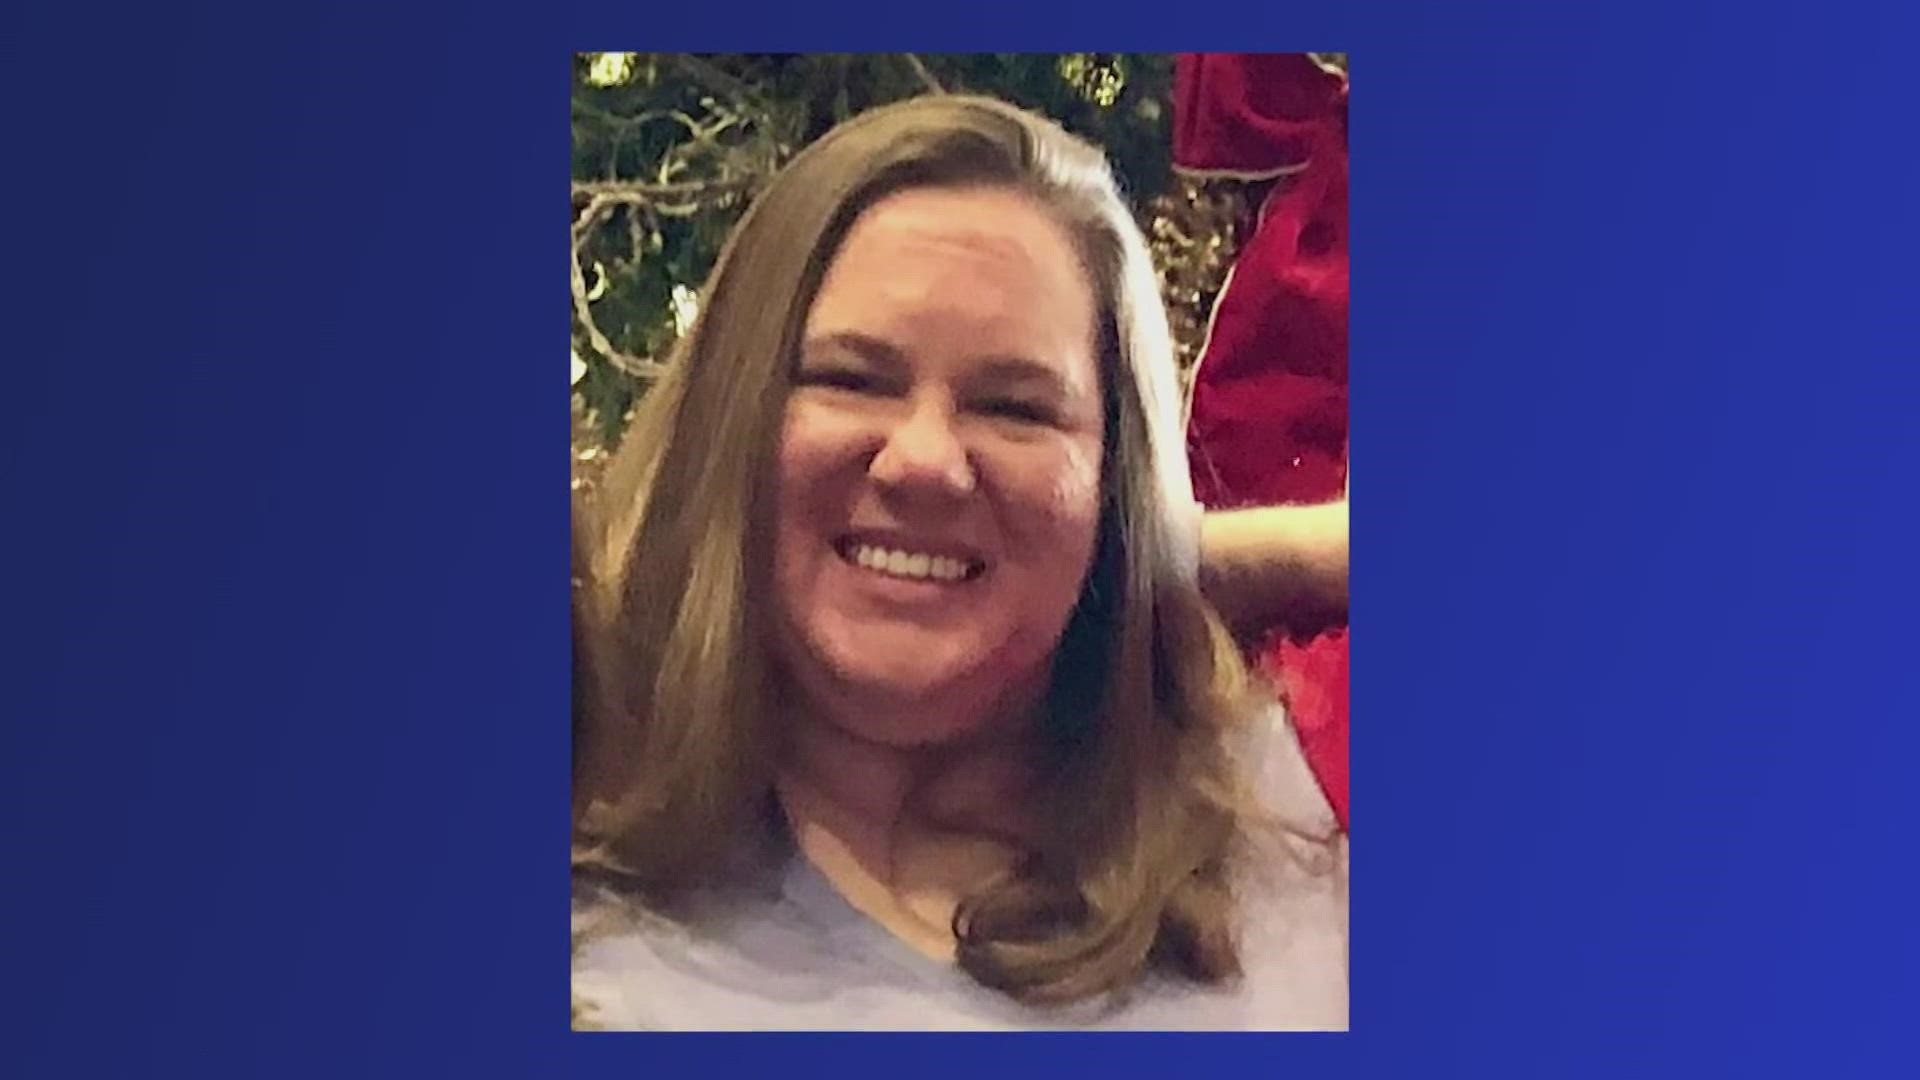 Caroline Gaddis' parents are asking for help finding their 39-year-old daughter who was last seen leaving work on March 18.